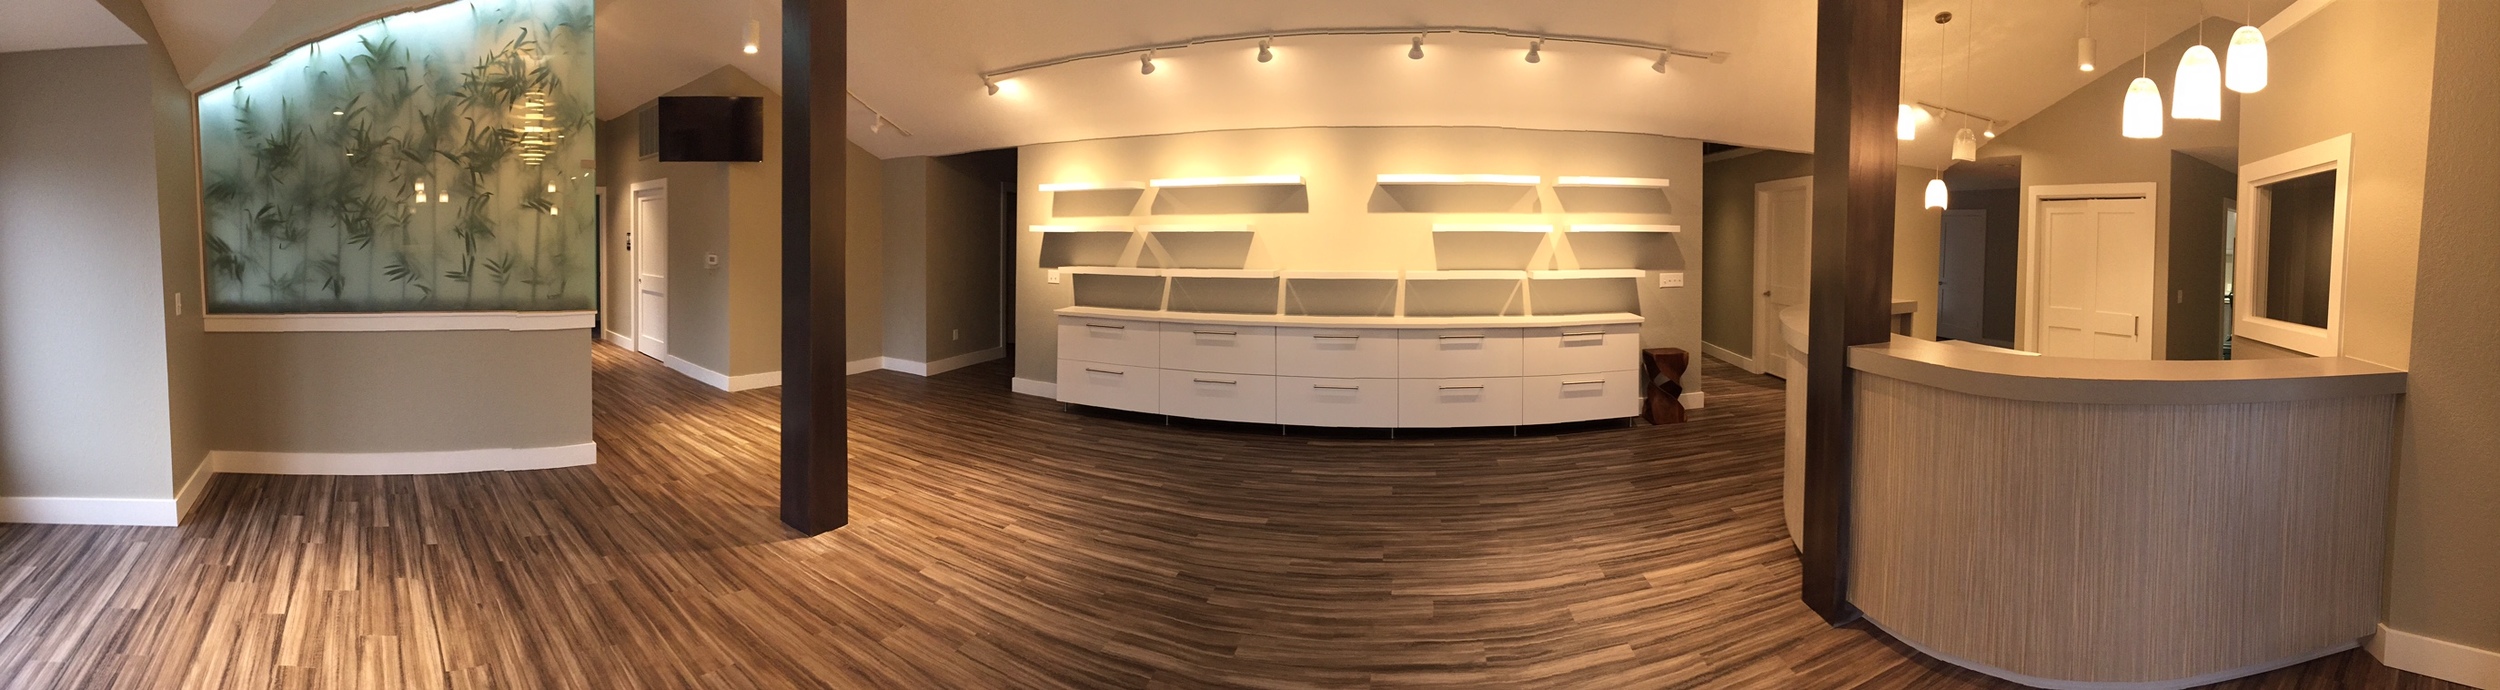 Dr. Welch Office 13 Lobby Panoramic.jpg